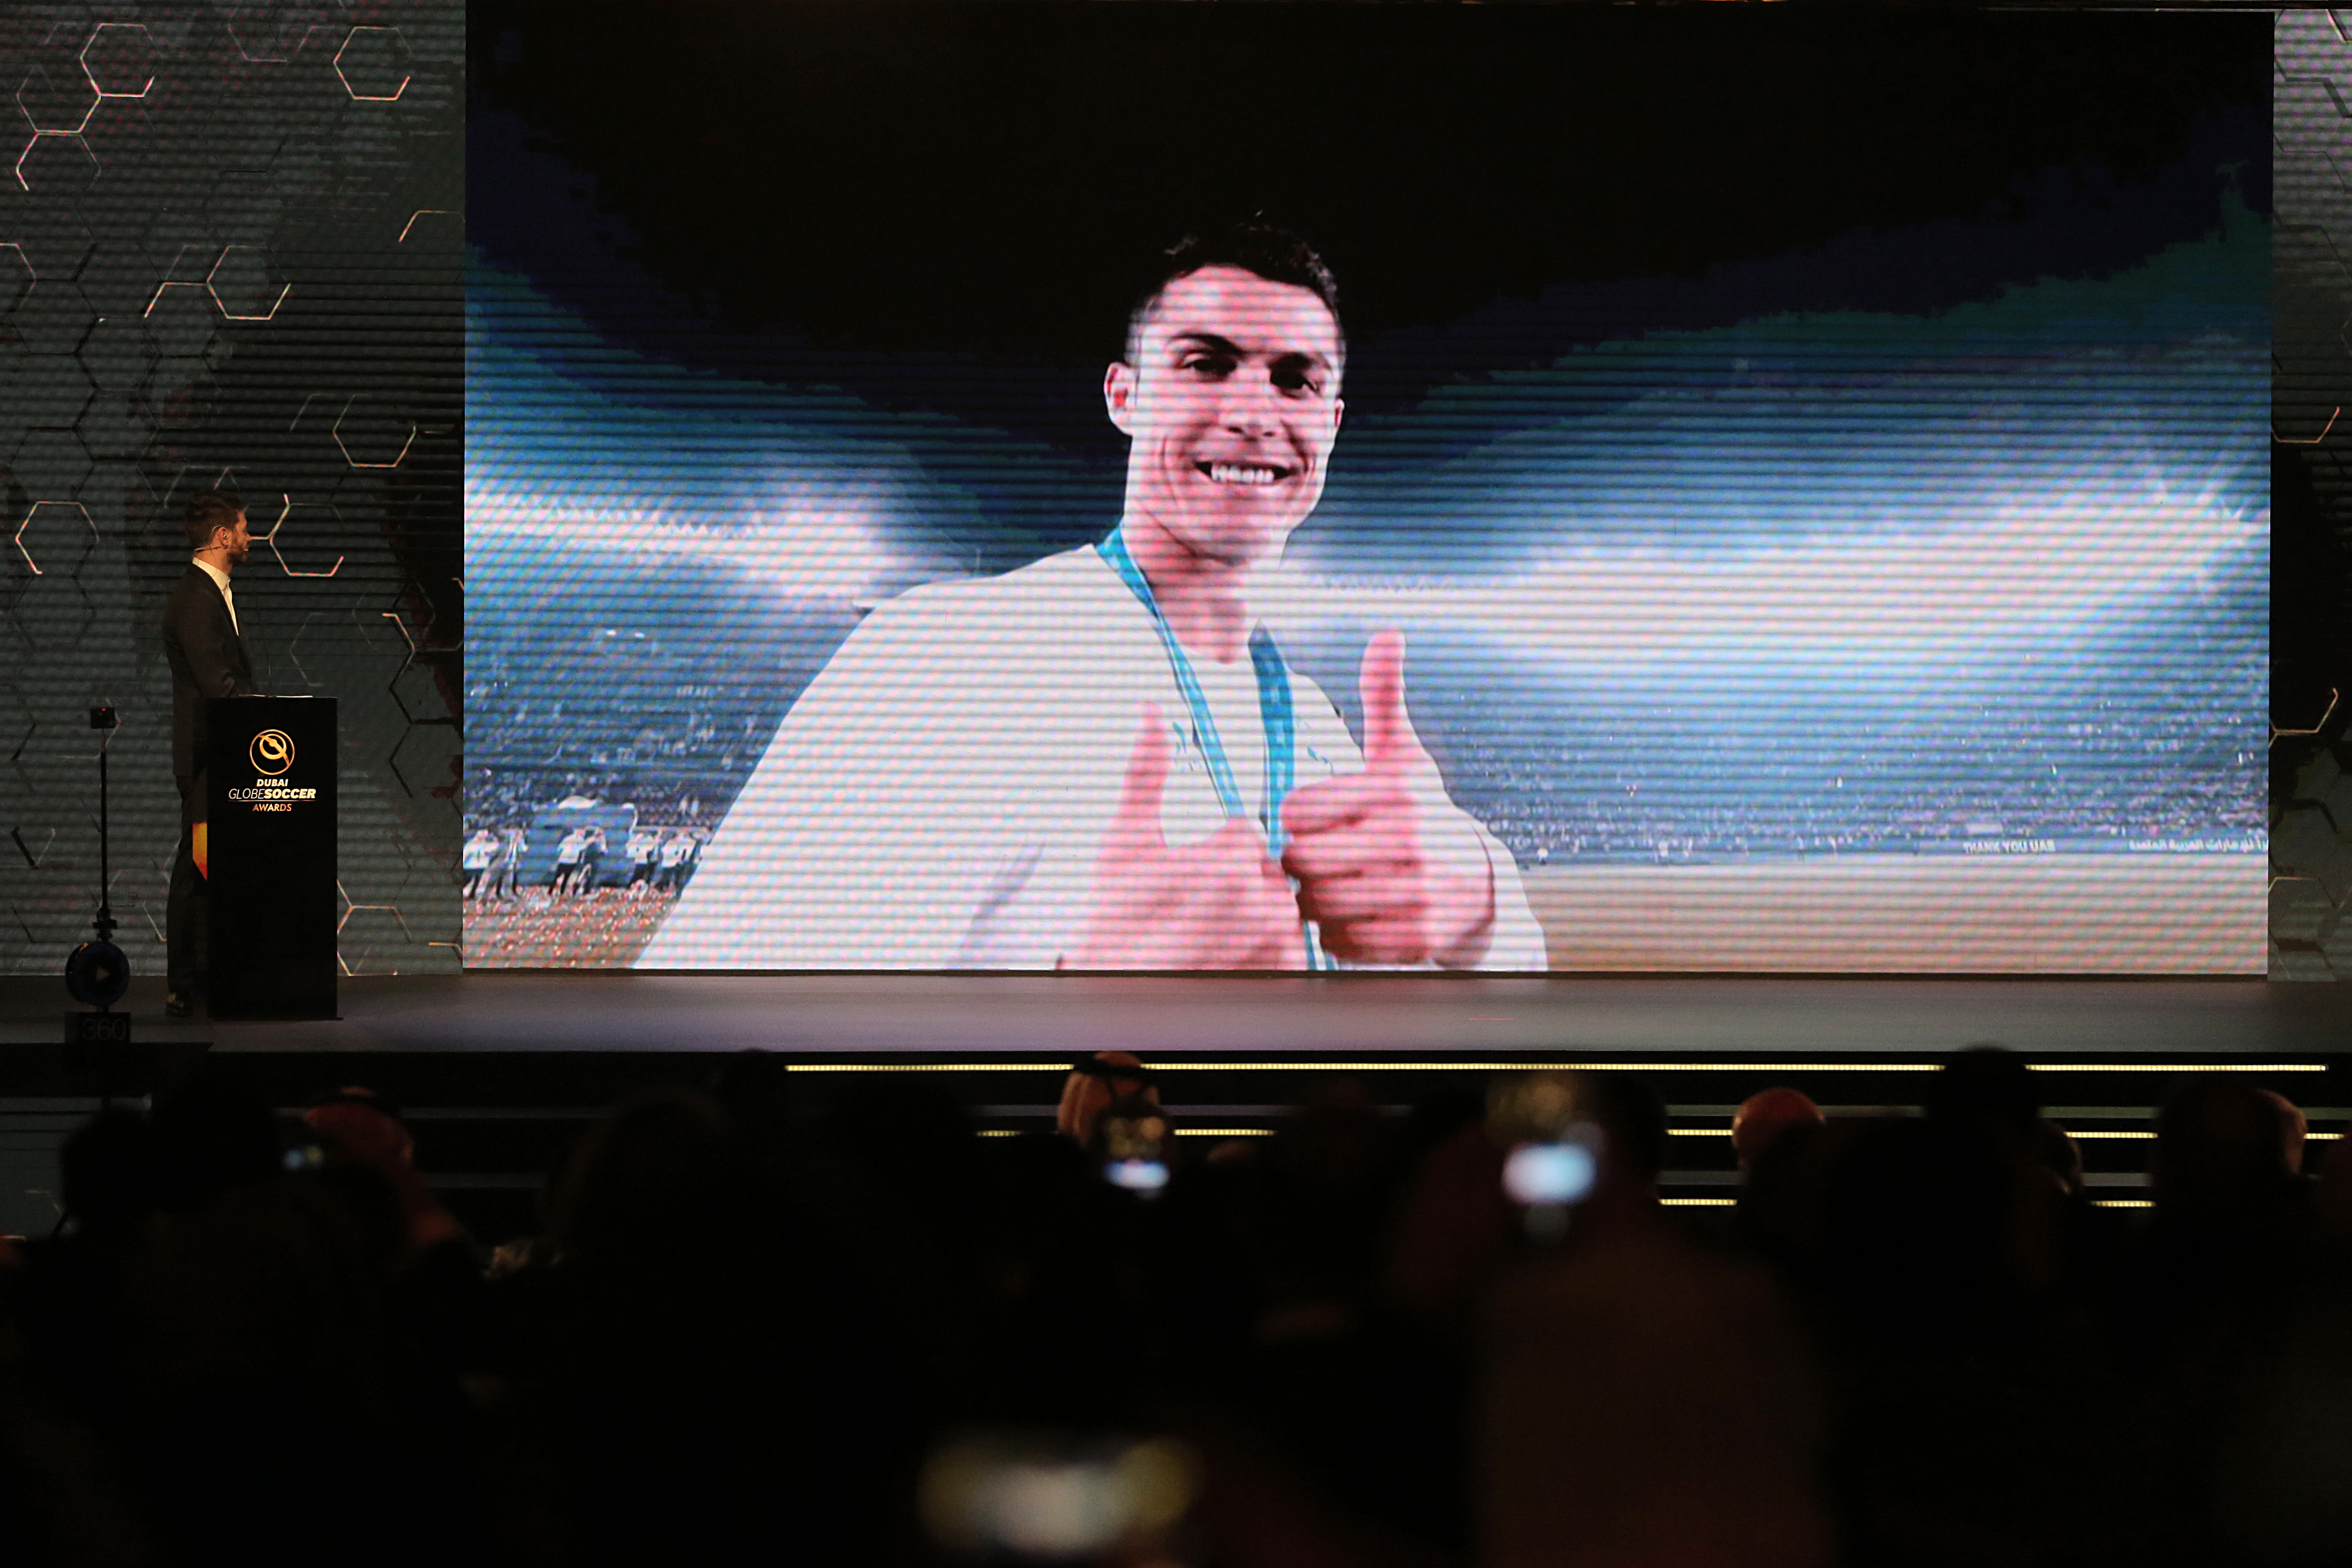 'Room for more' as Ronaldo wins another Globe award